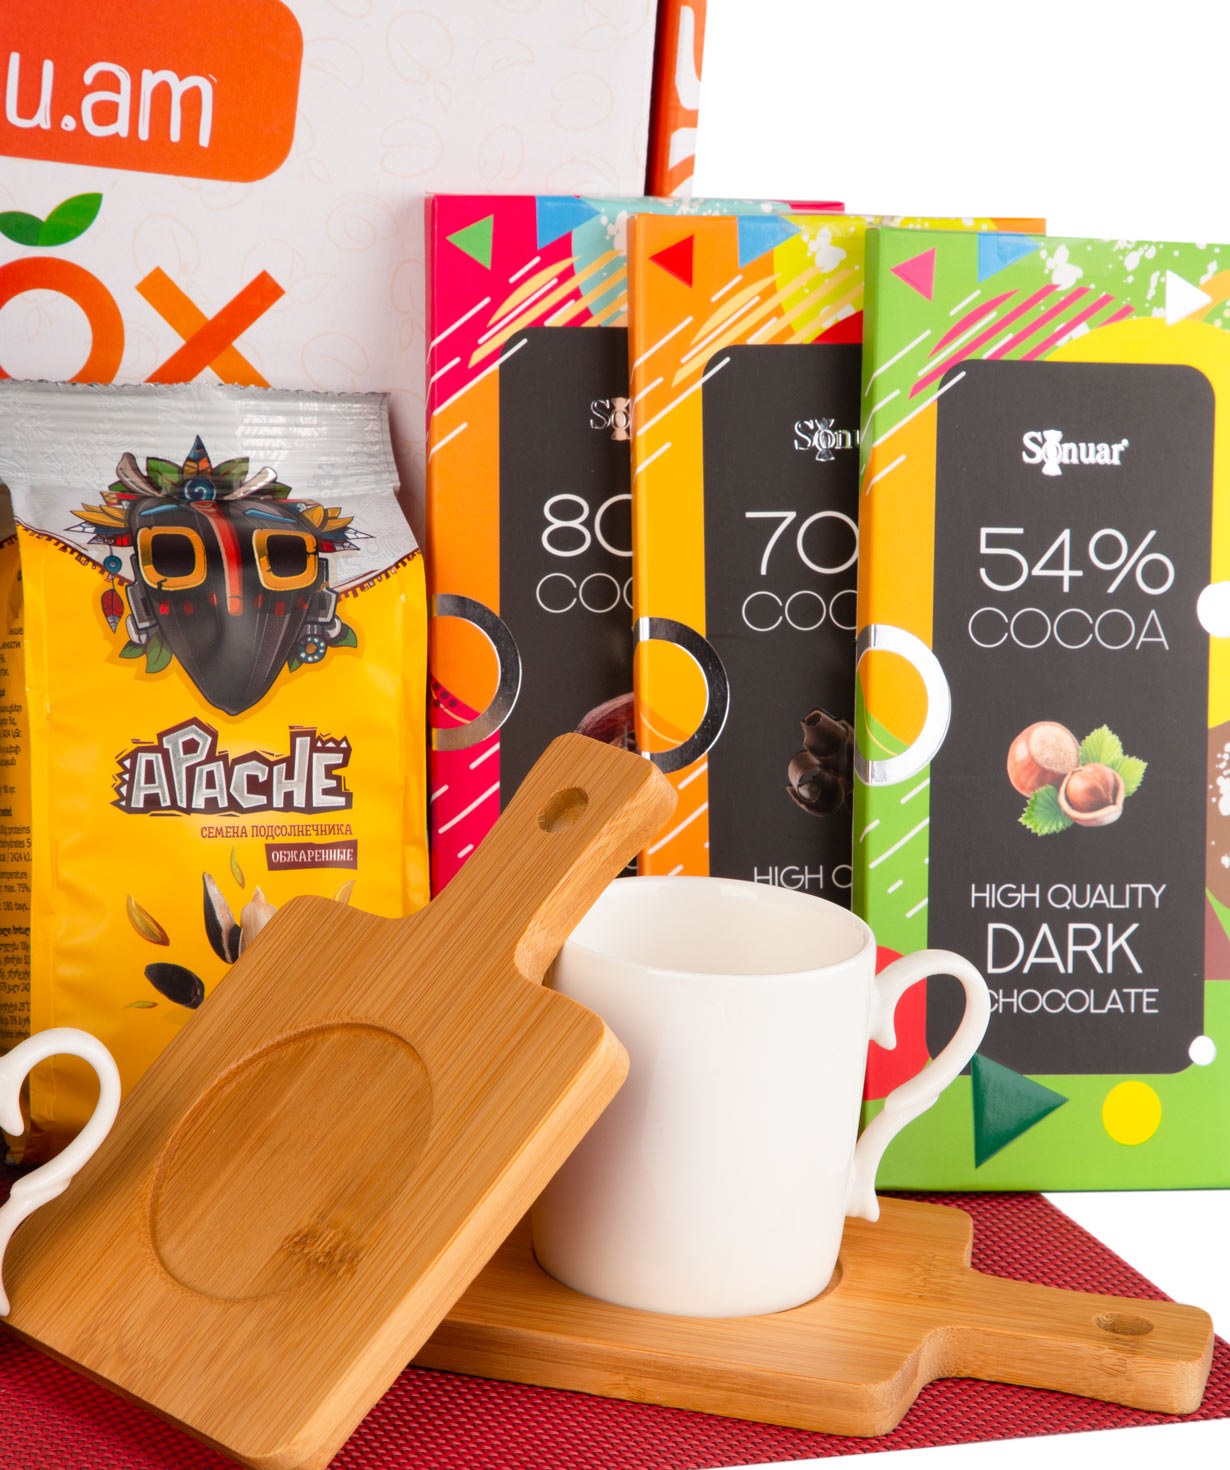 Snack box `Ubox` Let's have some coffee